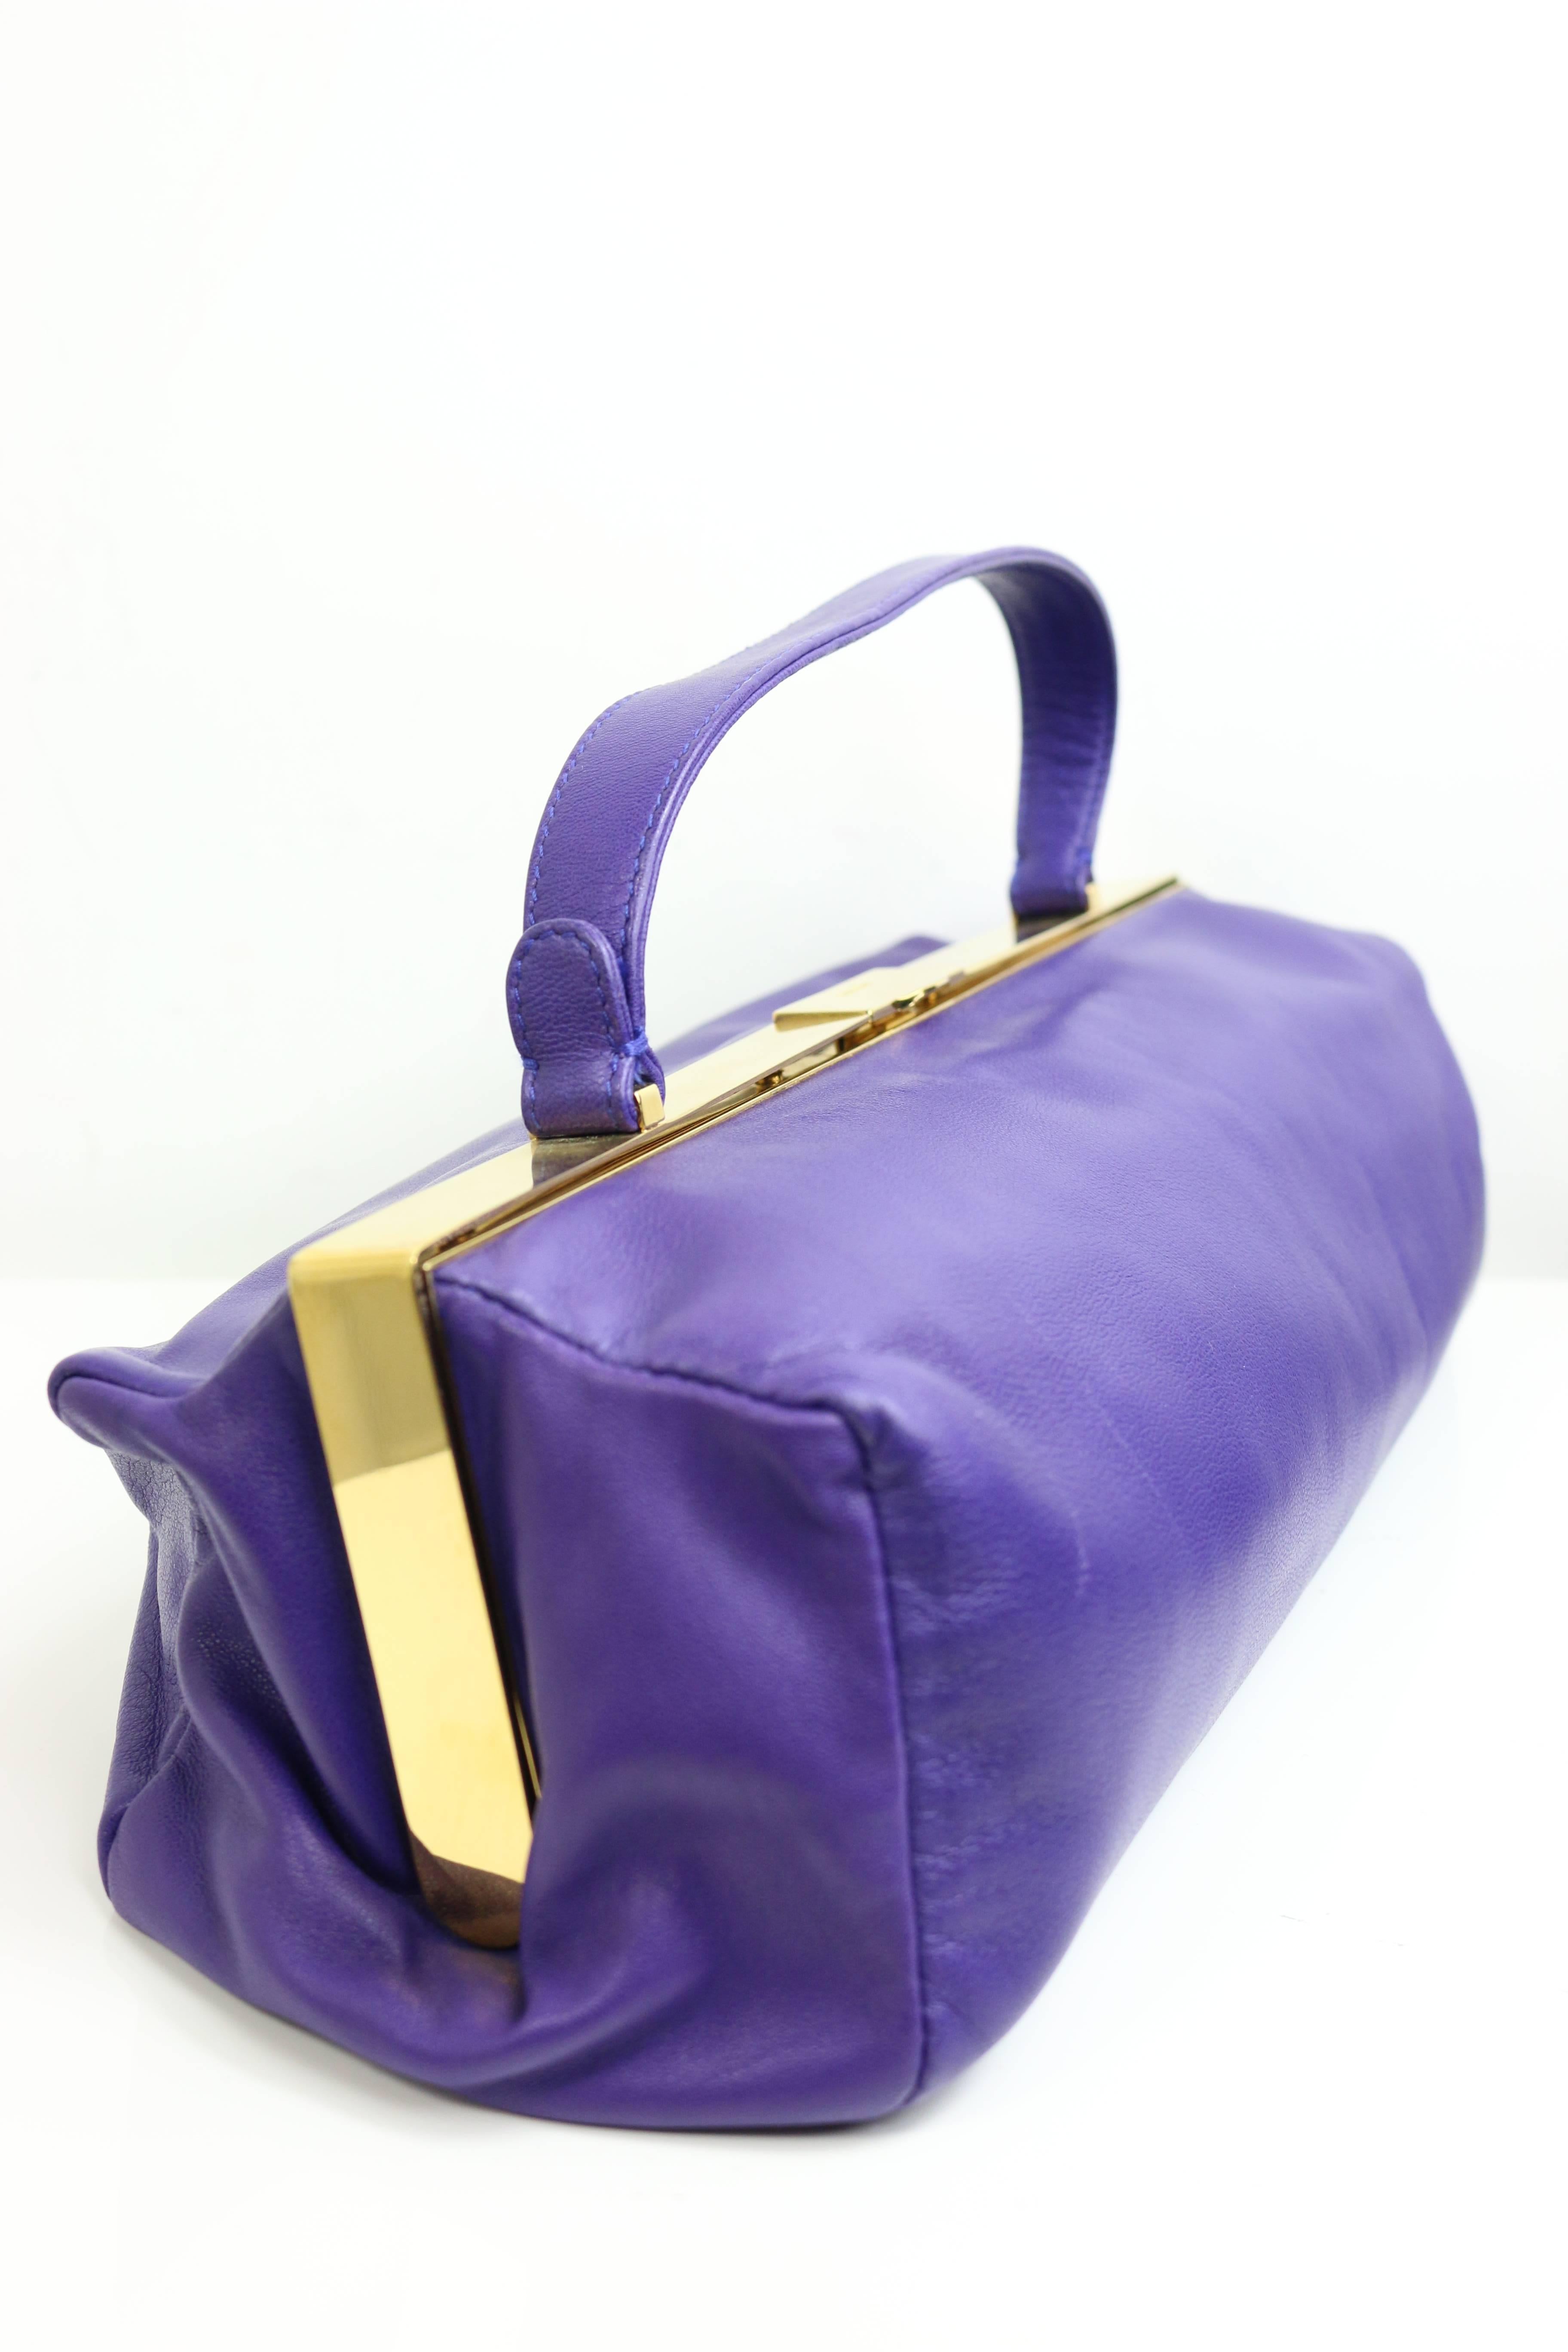 - Miu Miu purple leather rectangle shape handbag. 

- Length: 12in I Height: 4in I Width: 4.5in I Strap: 4in
(all measurements are approximate). 
